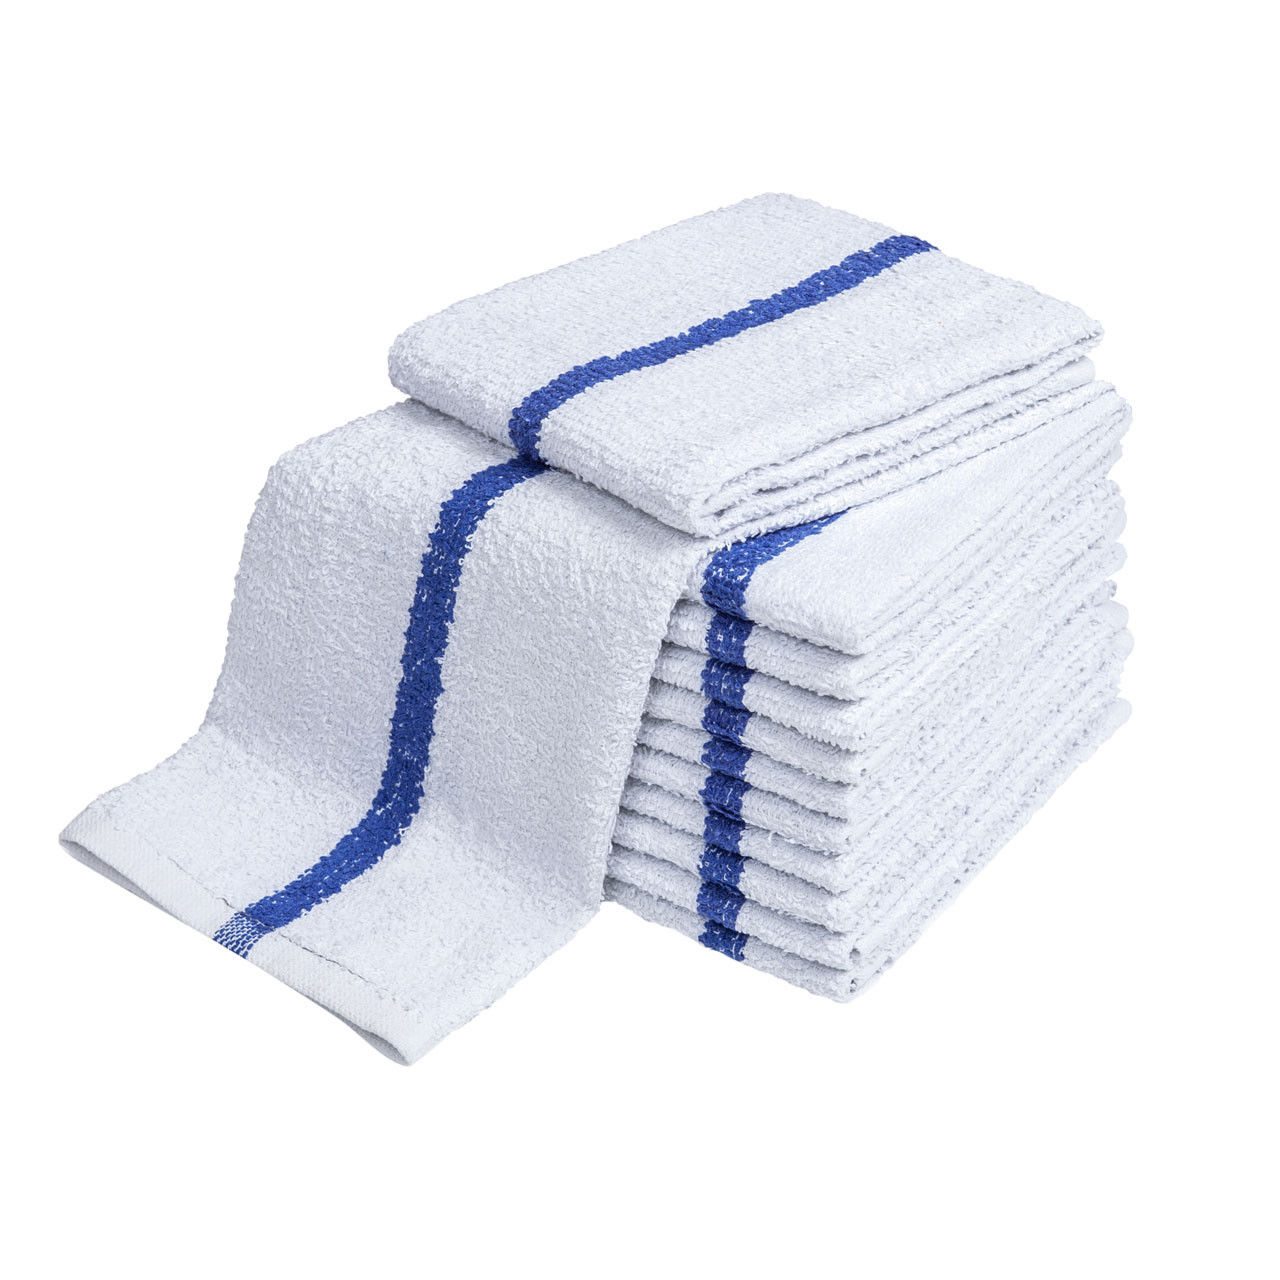 What alternative name is given to these ADI Full Terry, Center Stripe bar towels?